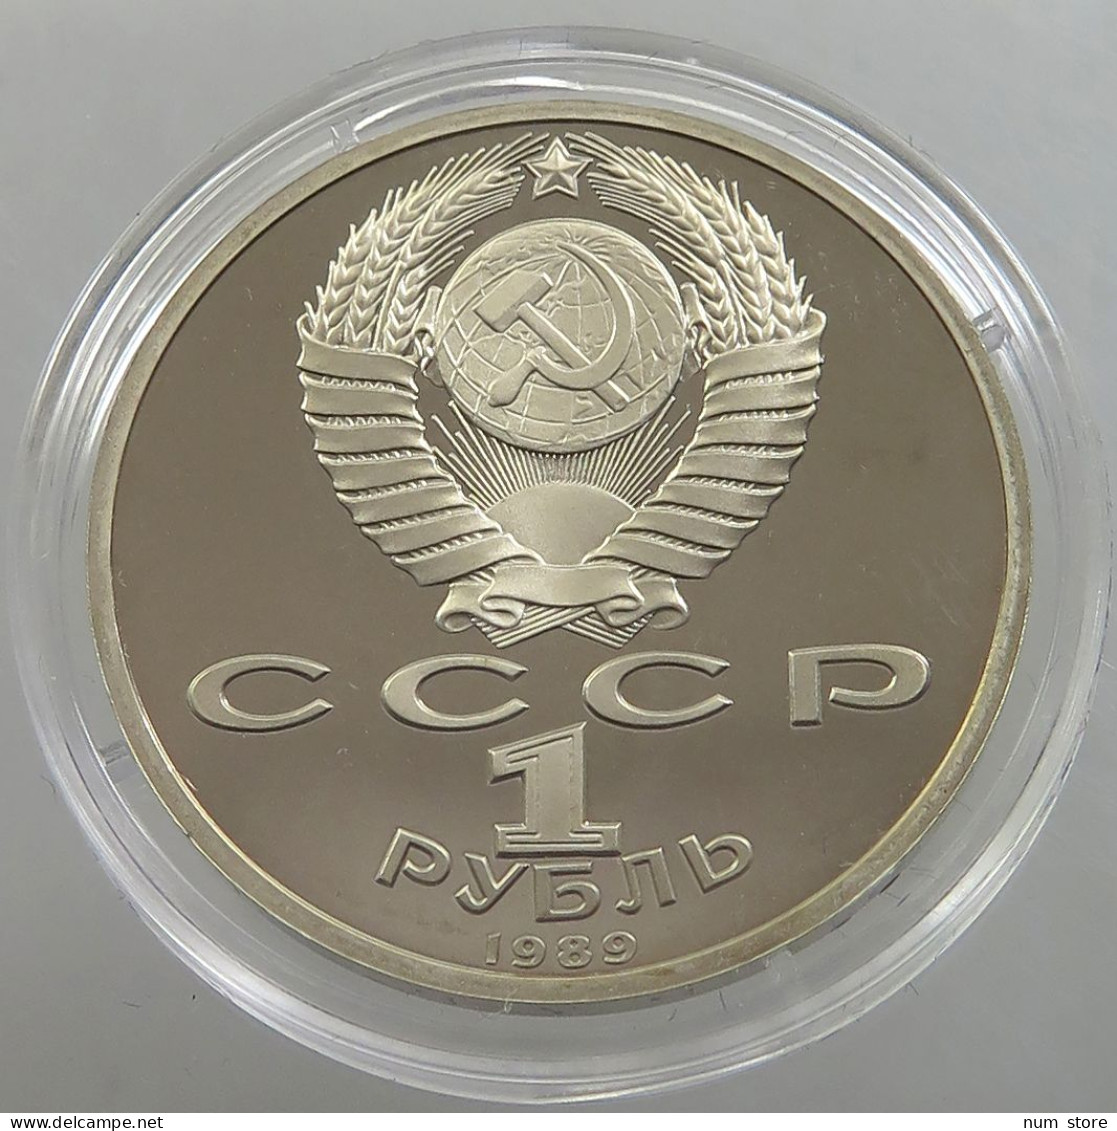 RUSSIA USSR ROUBLE 1989 LERMONTOV PROOF #sm14 0565 - Russland